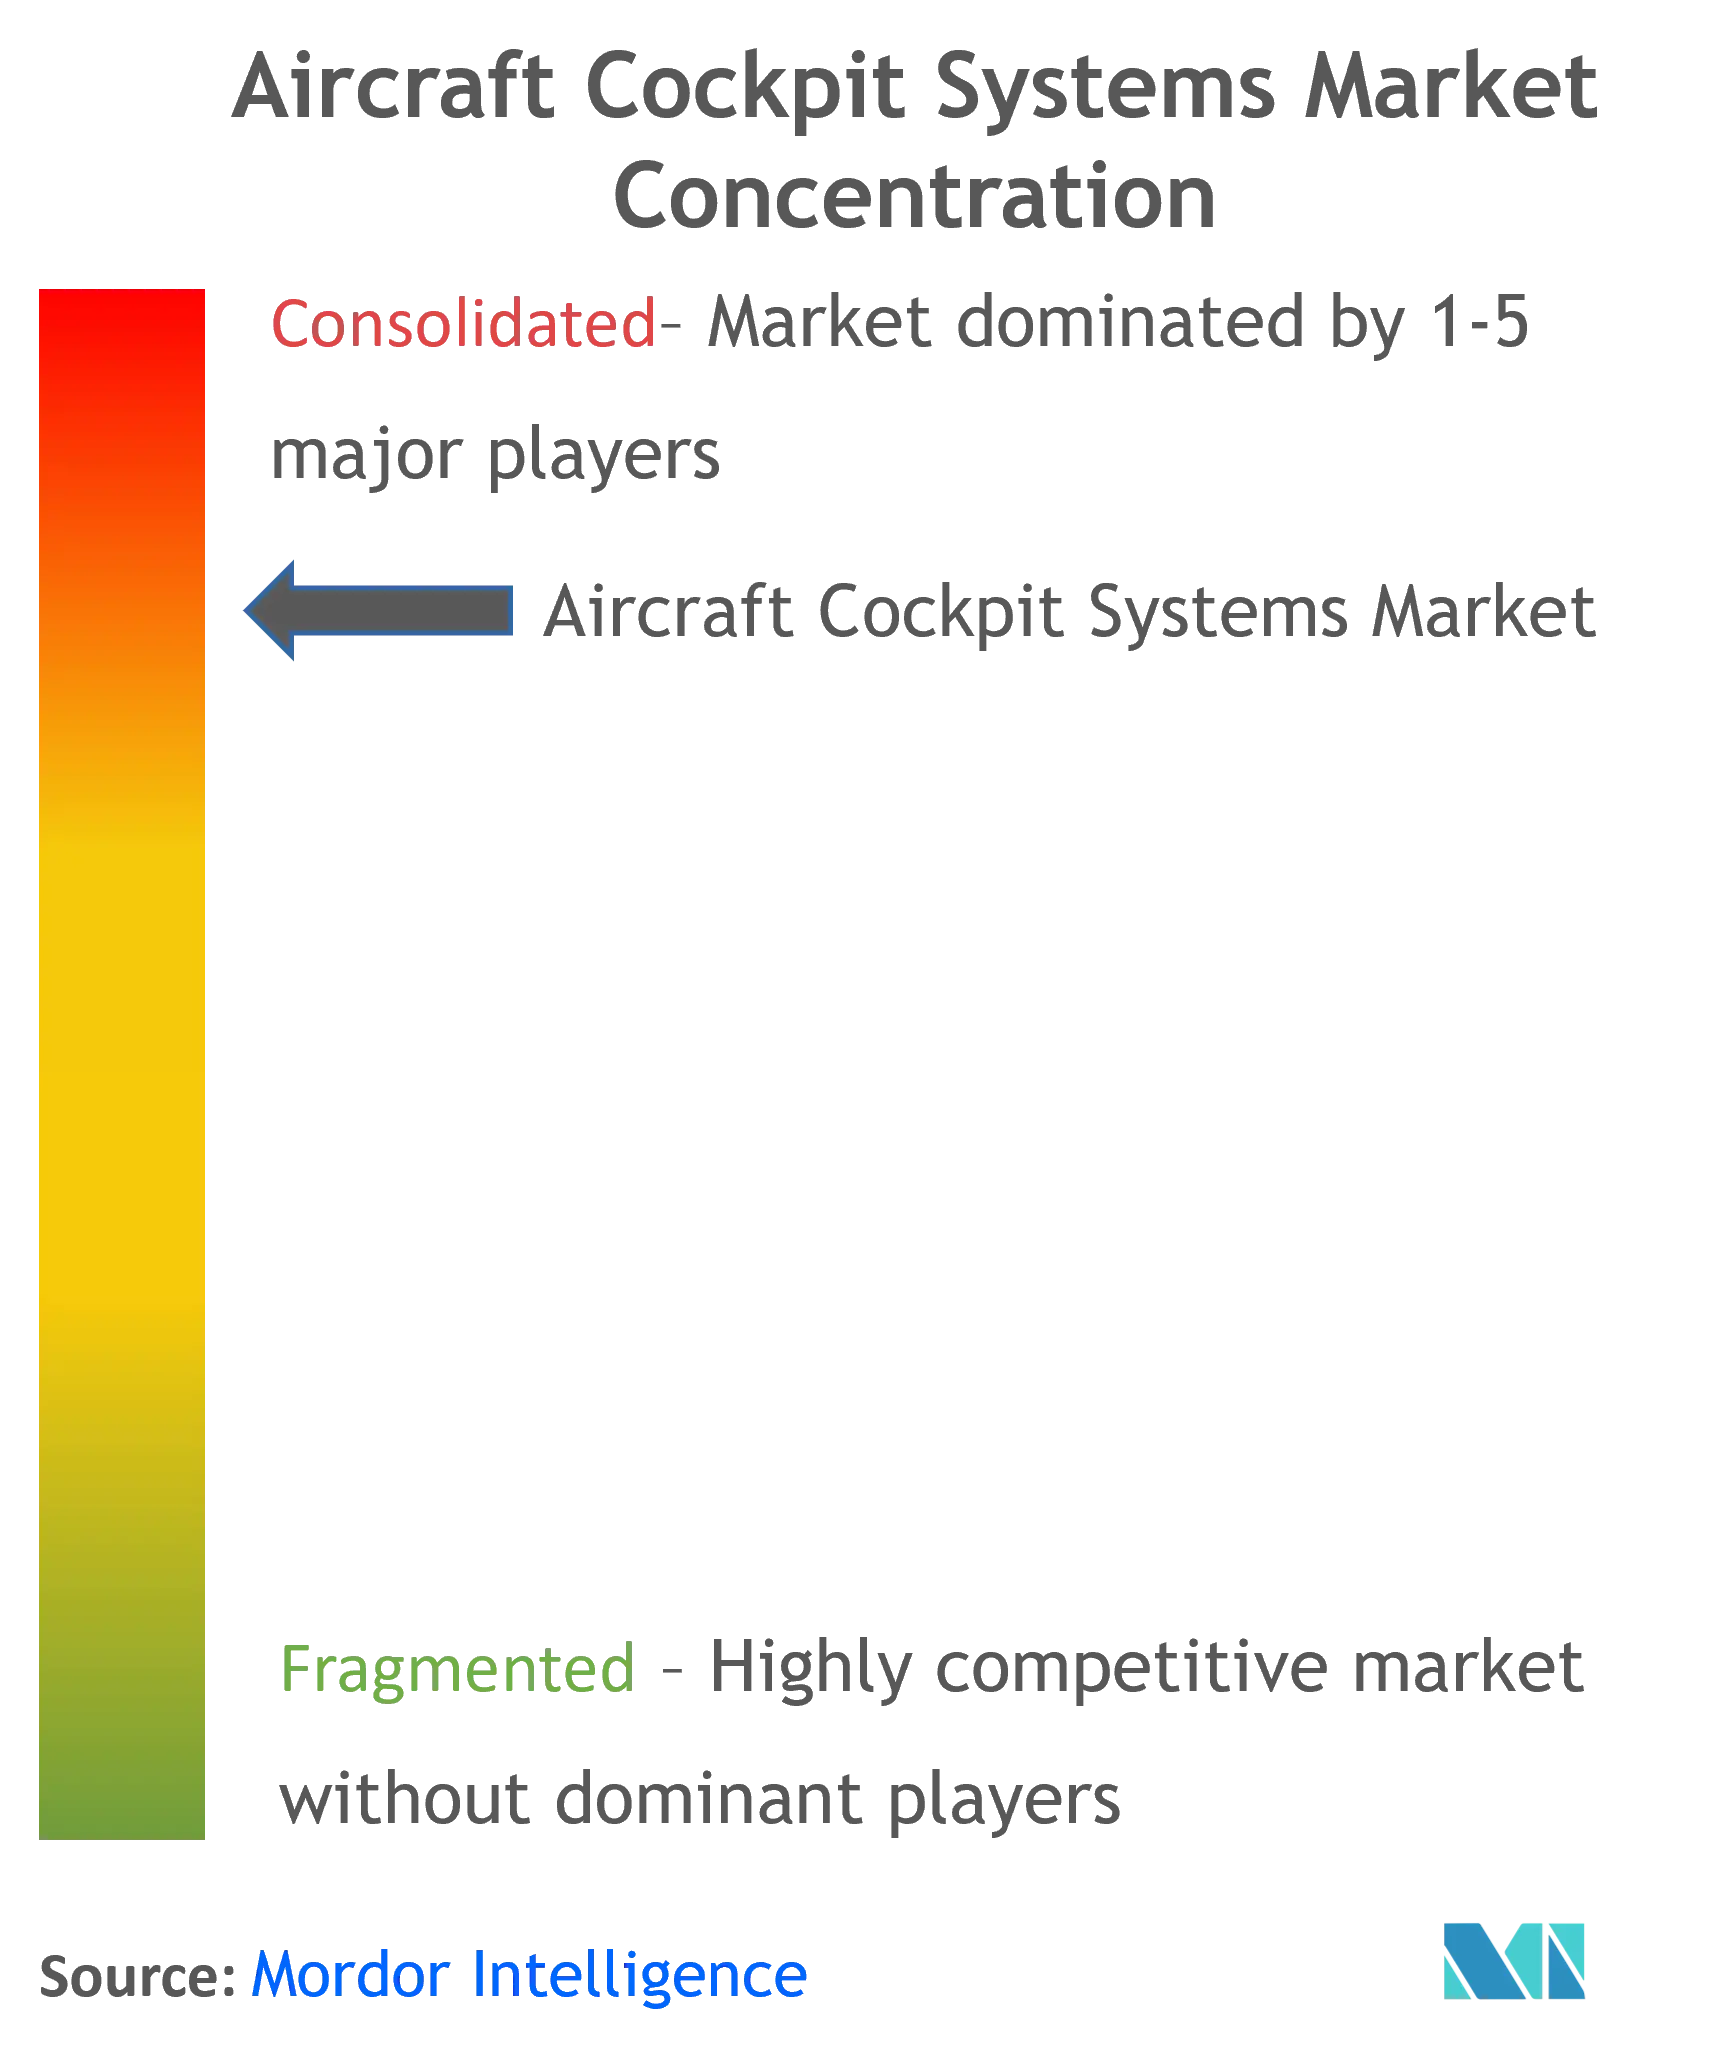 Aircraft Cockpit Systems Market Concentration